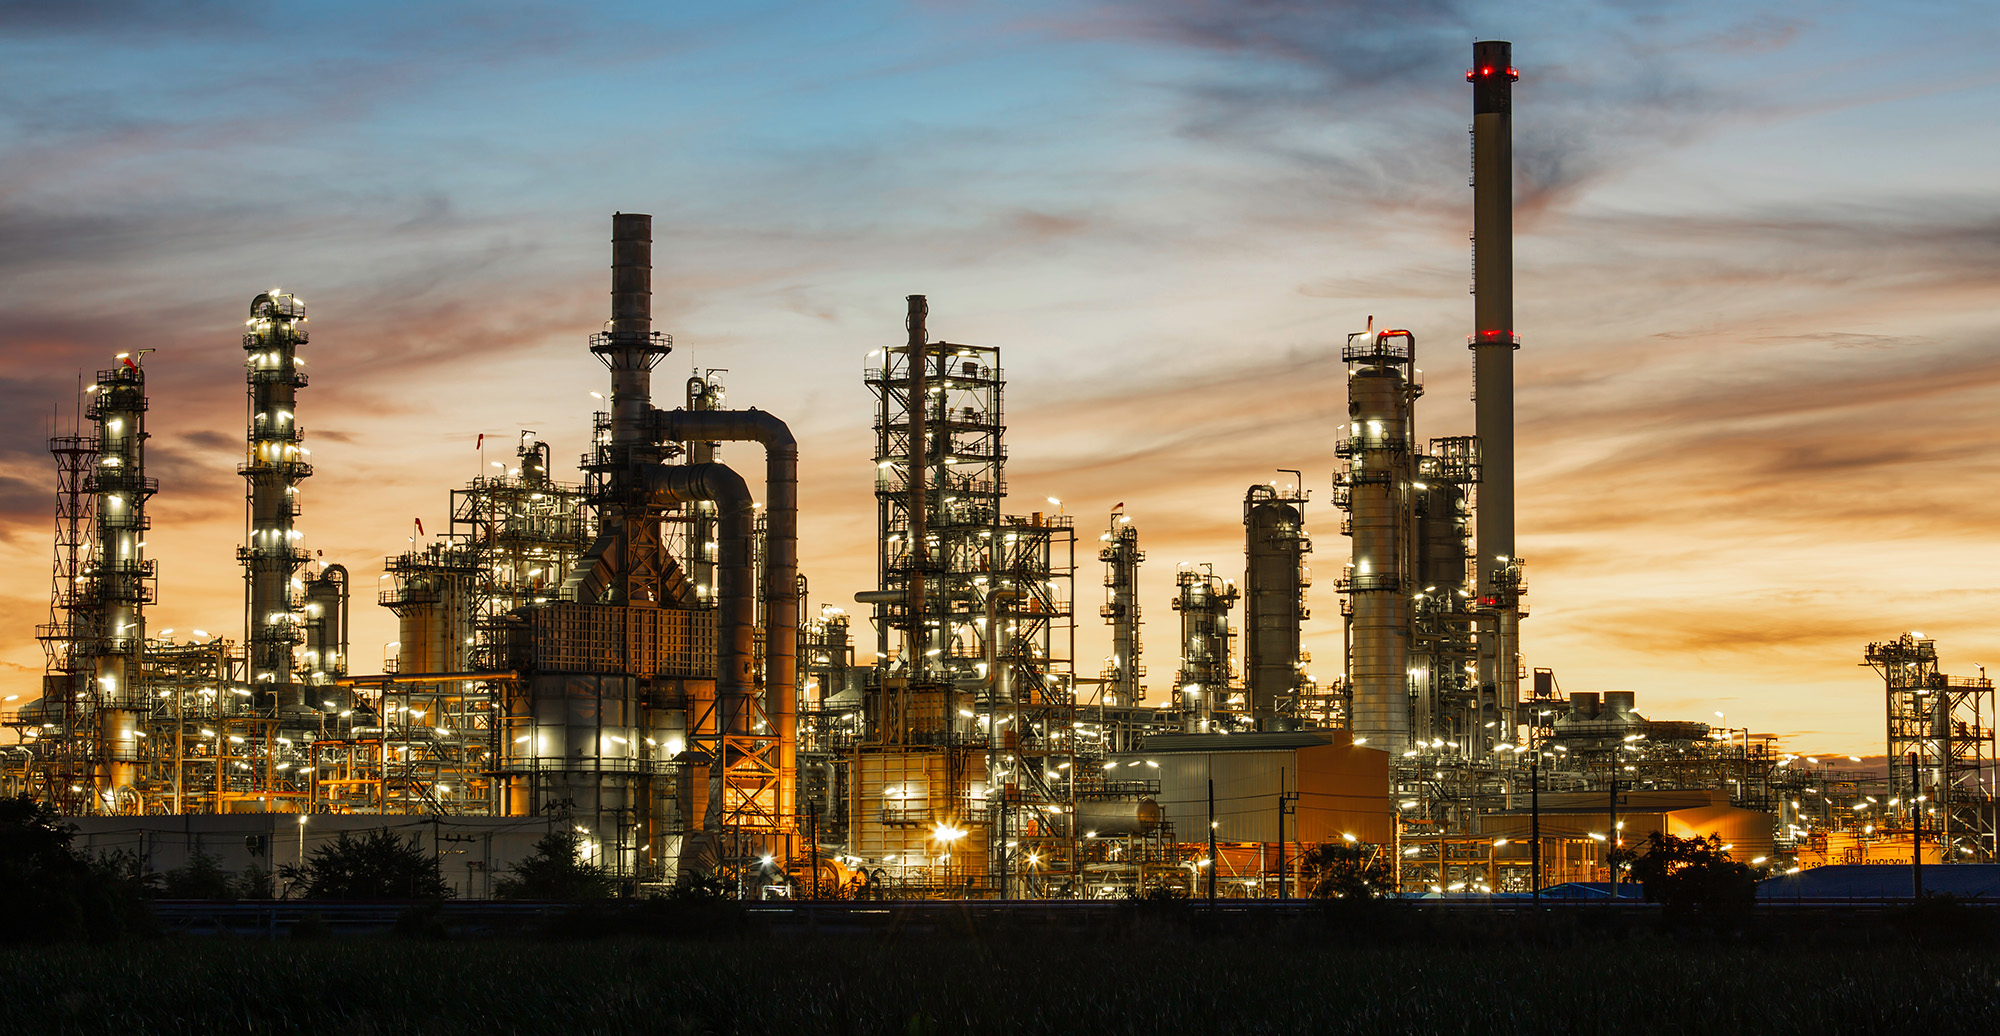 Oil​ refinery​ and​ plant and tower column of Petrochemistry industry in oil​ and​ gas​ ​industrial with​ cloud​ orange​ ​sky the sunrise​ background​